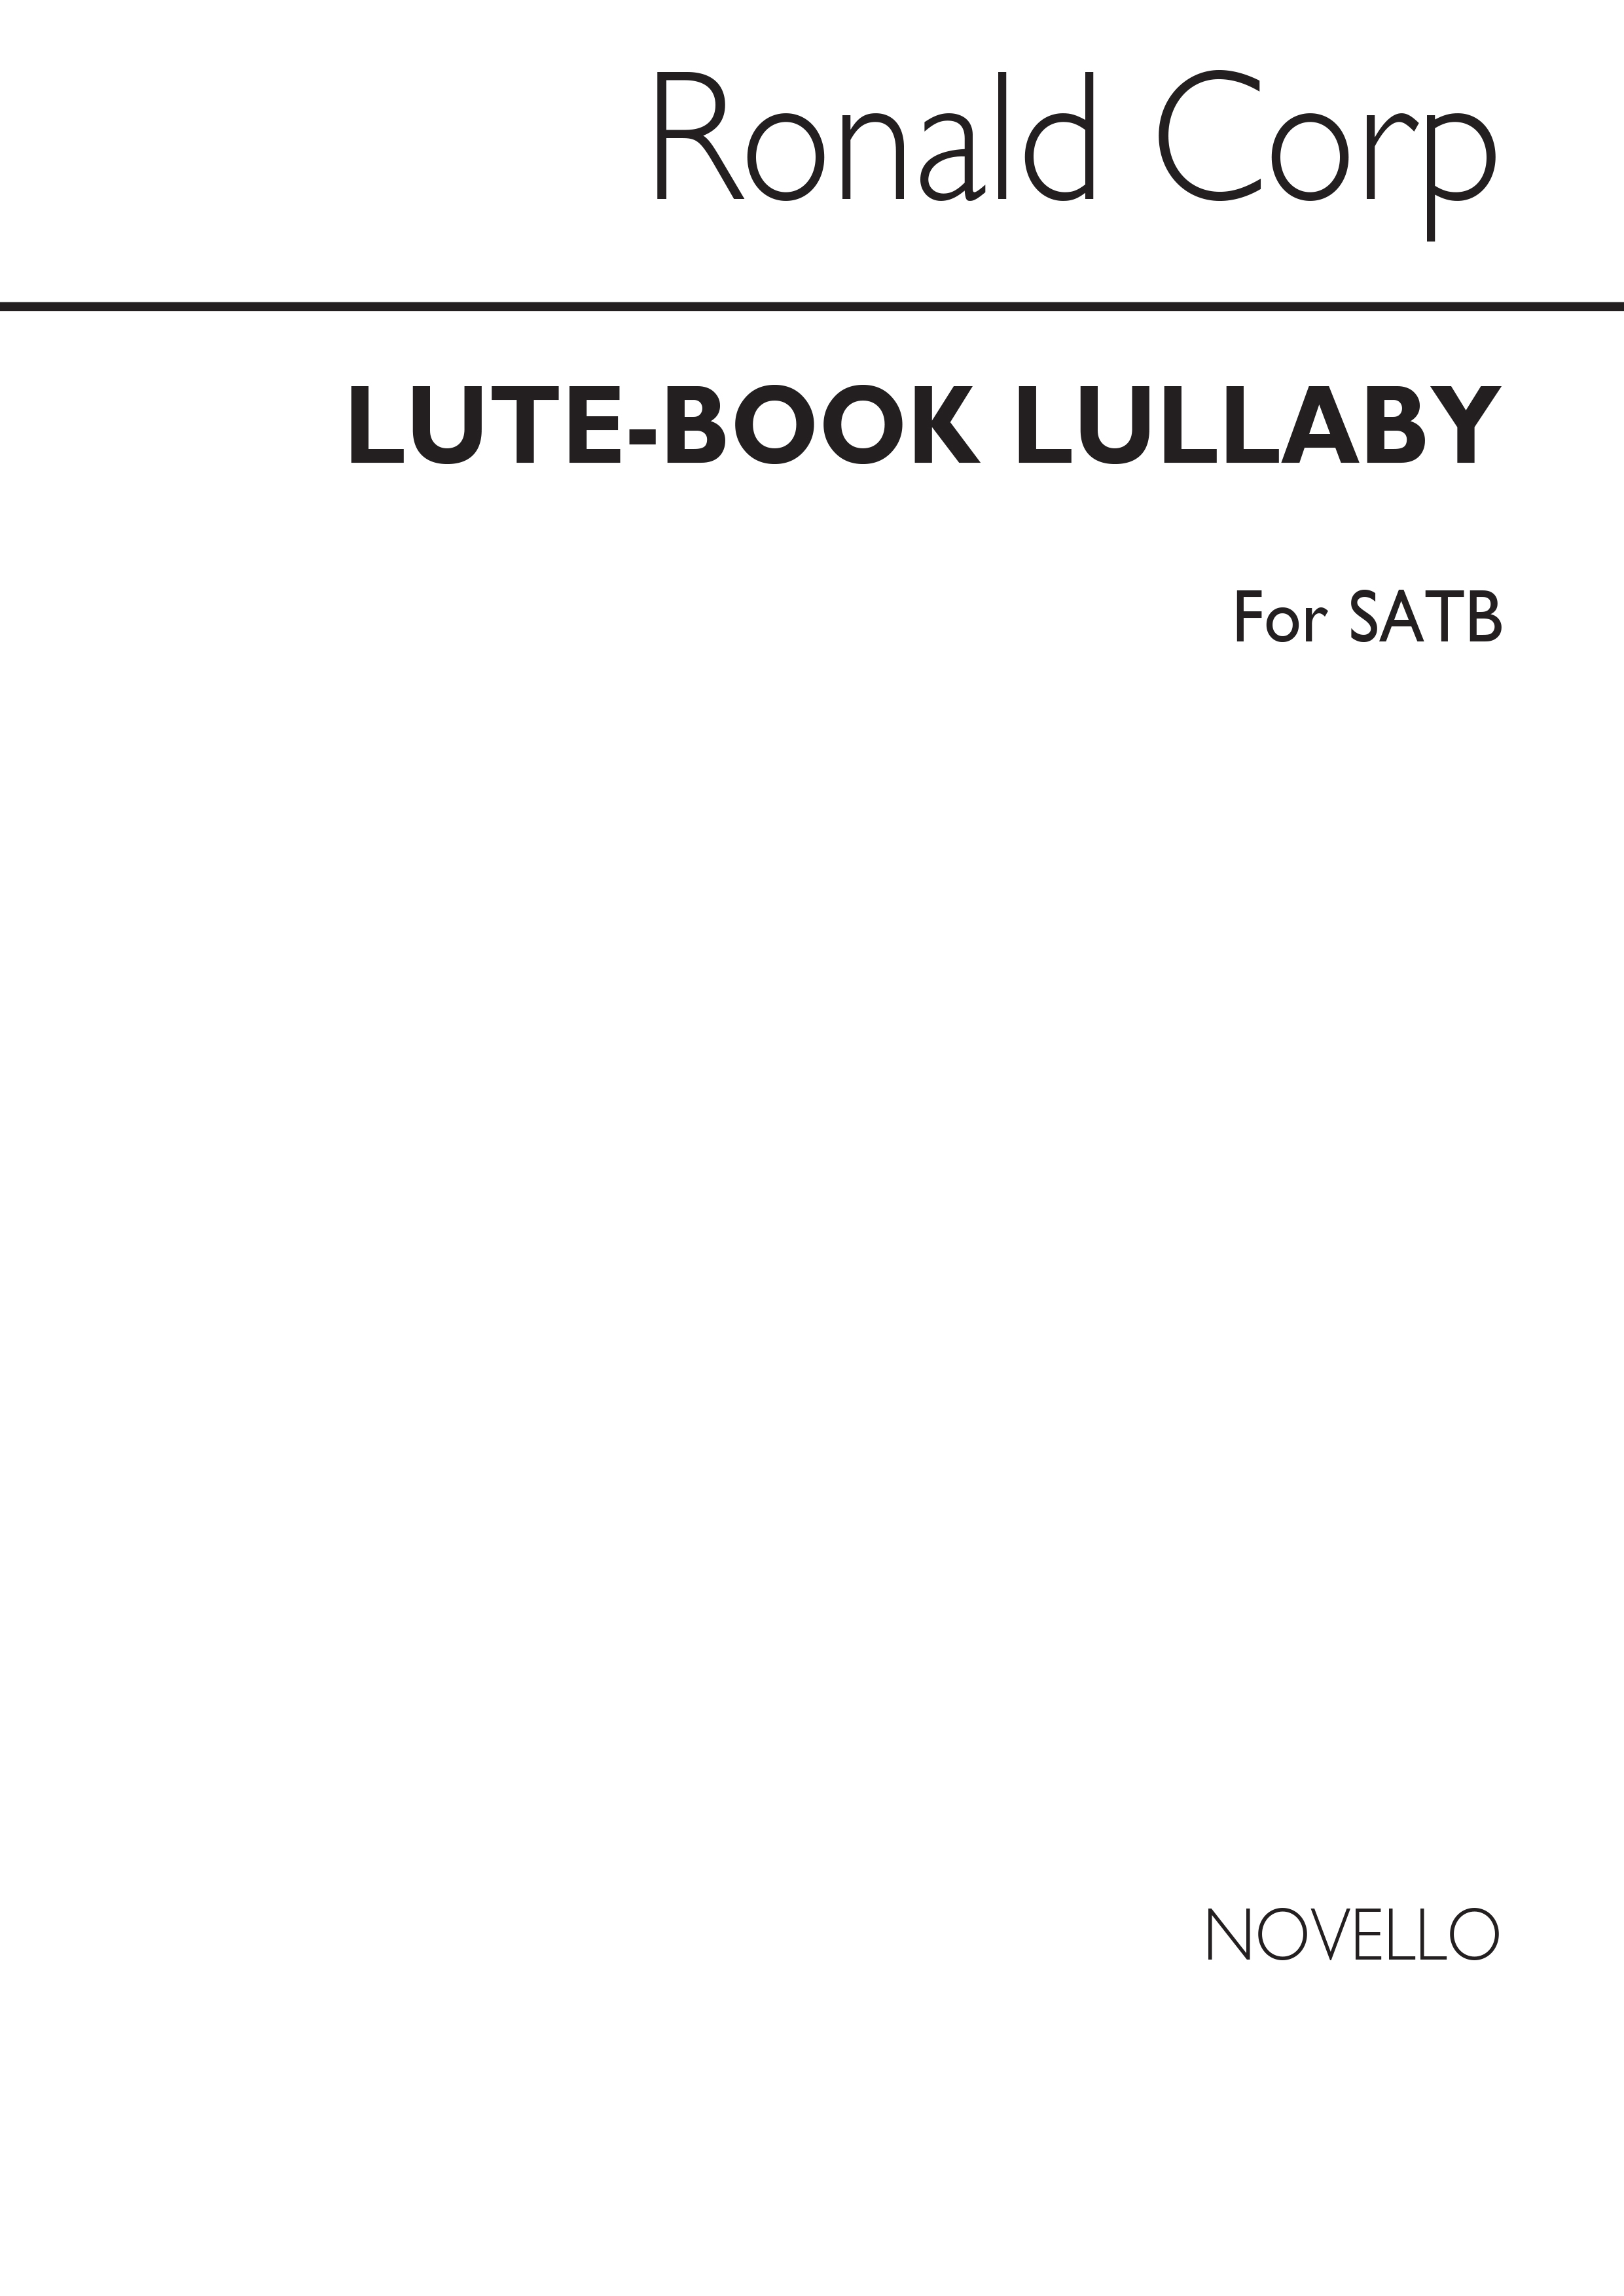 Lute-book Lullaby for SATB Chorus: SATB: Vocal Score